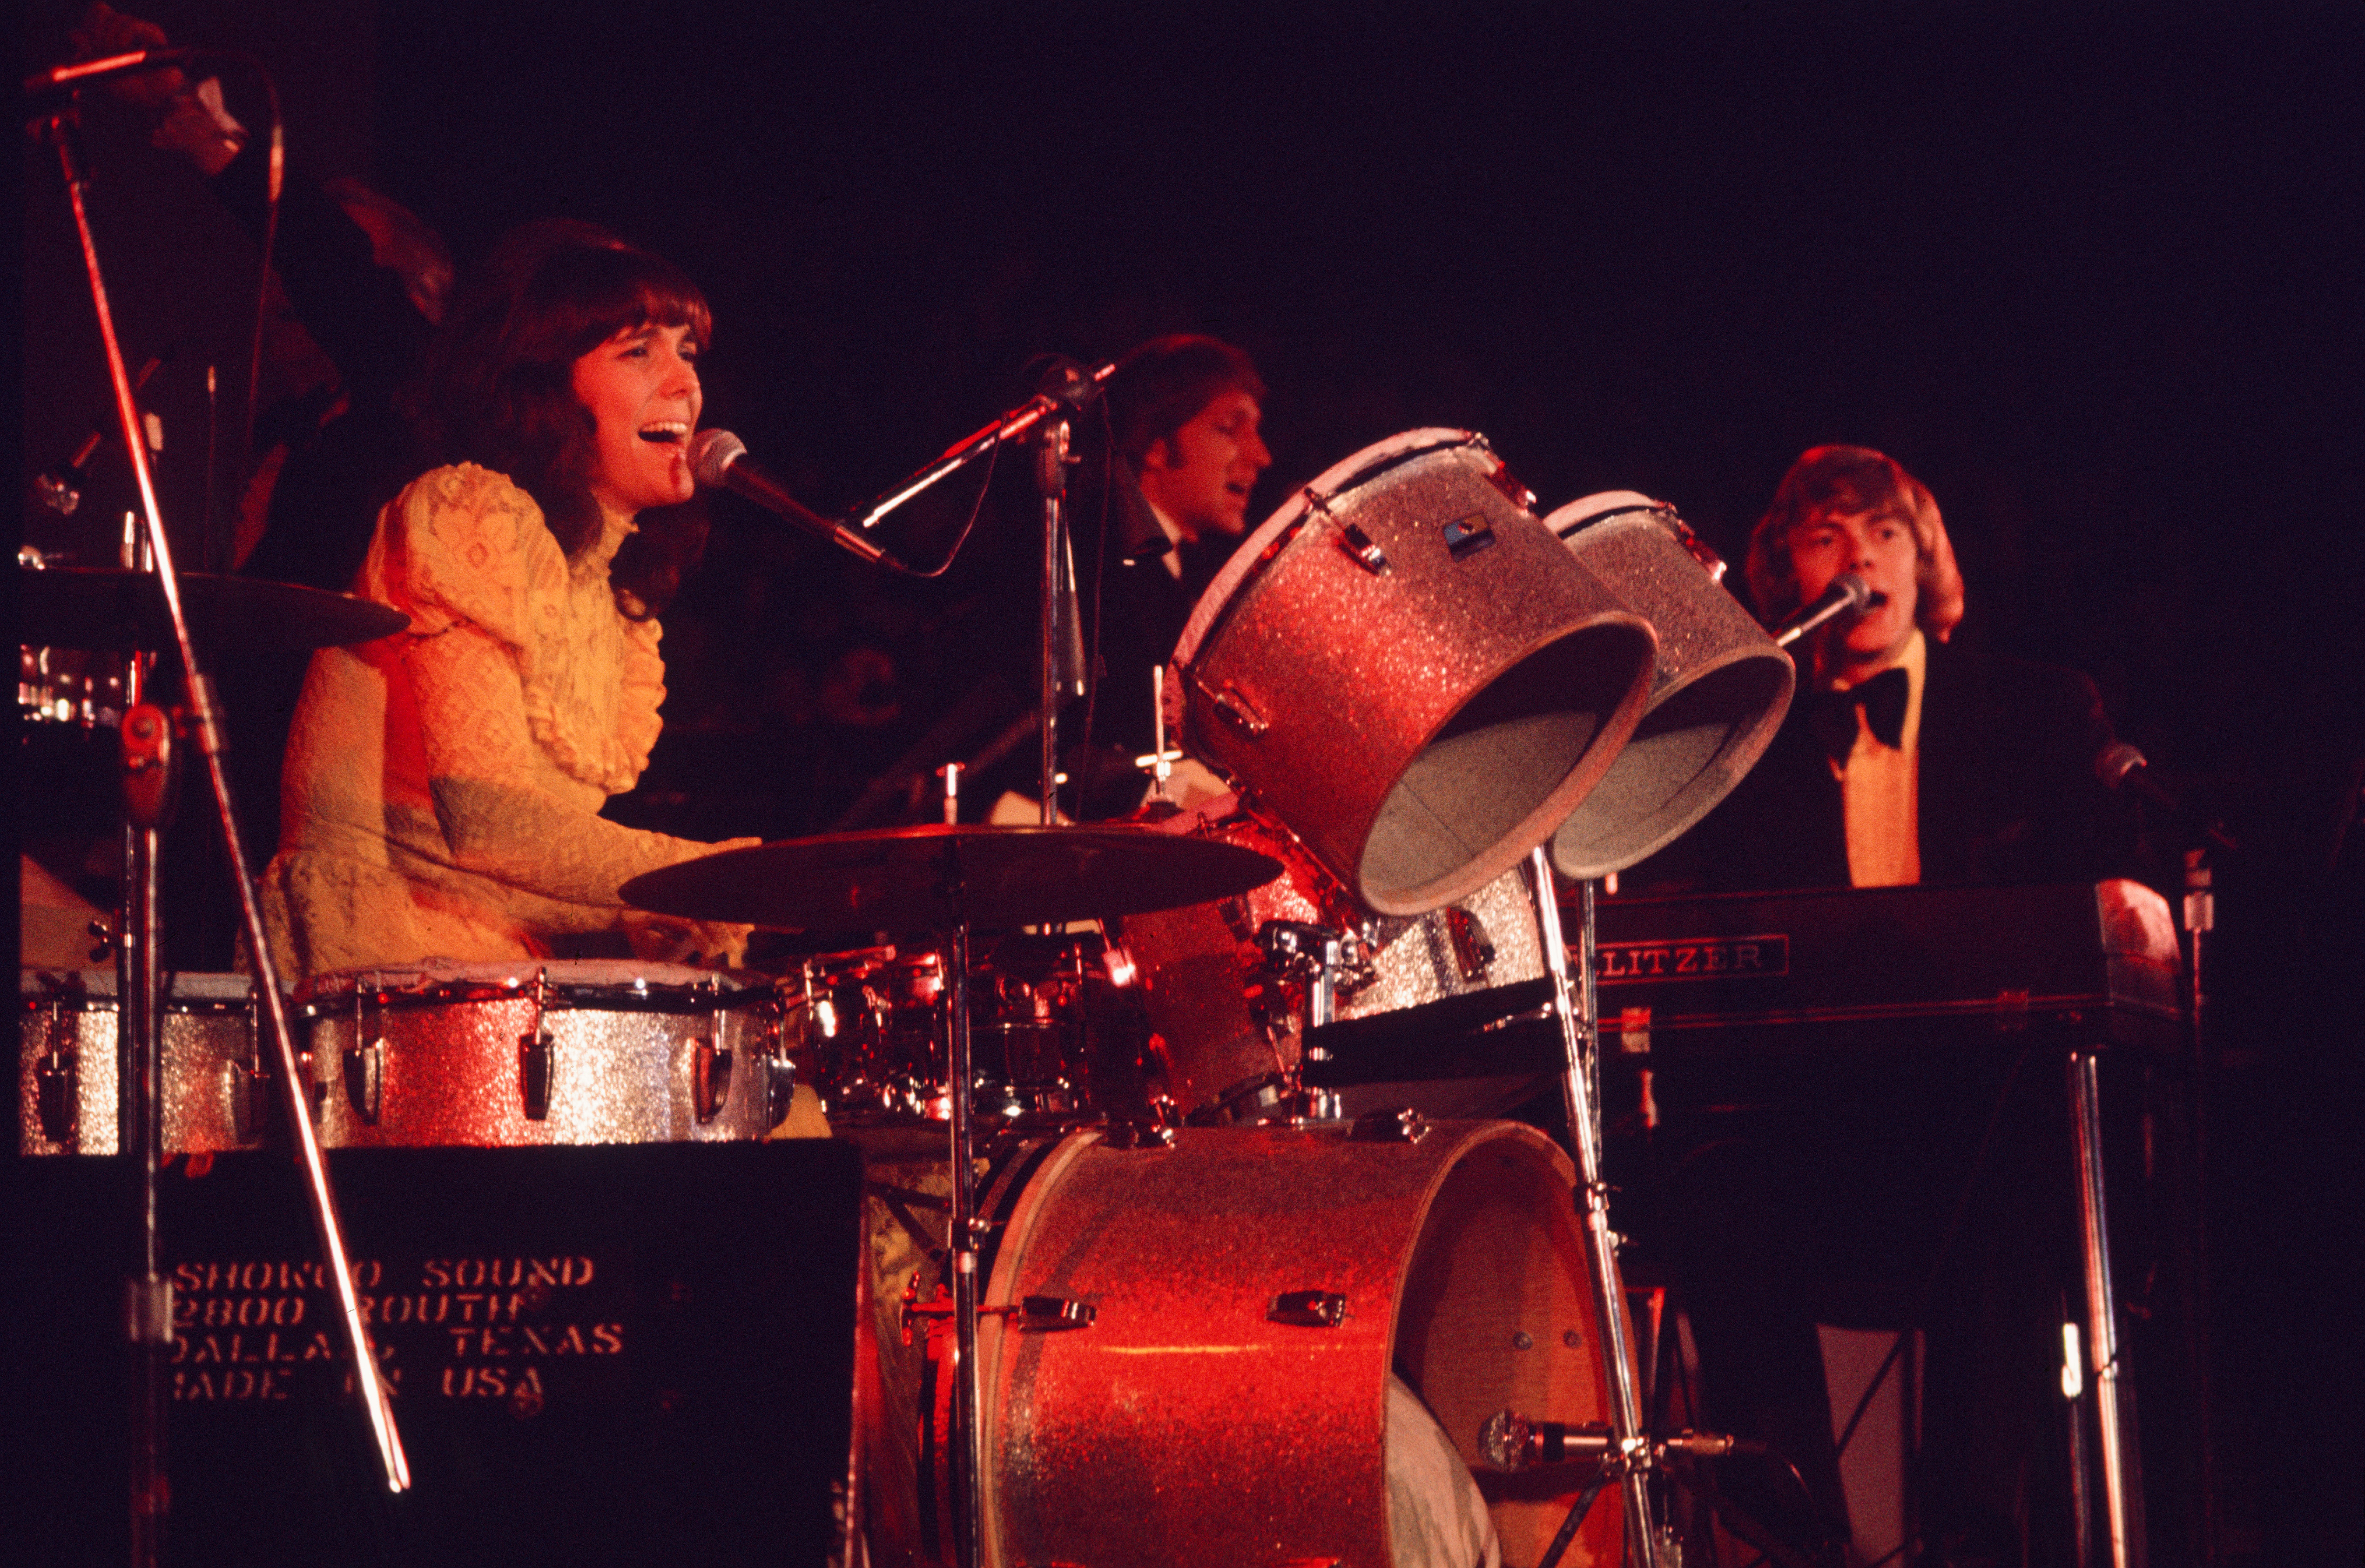 The Carpenters perform on stage at Nippon Budokan, Tokyo, Japan, 2nd June 1972 | Source: Getty Images